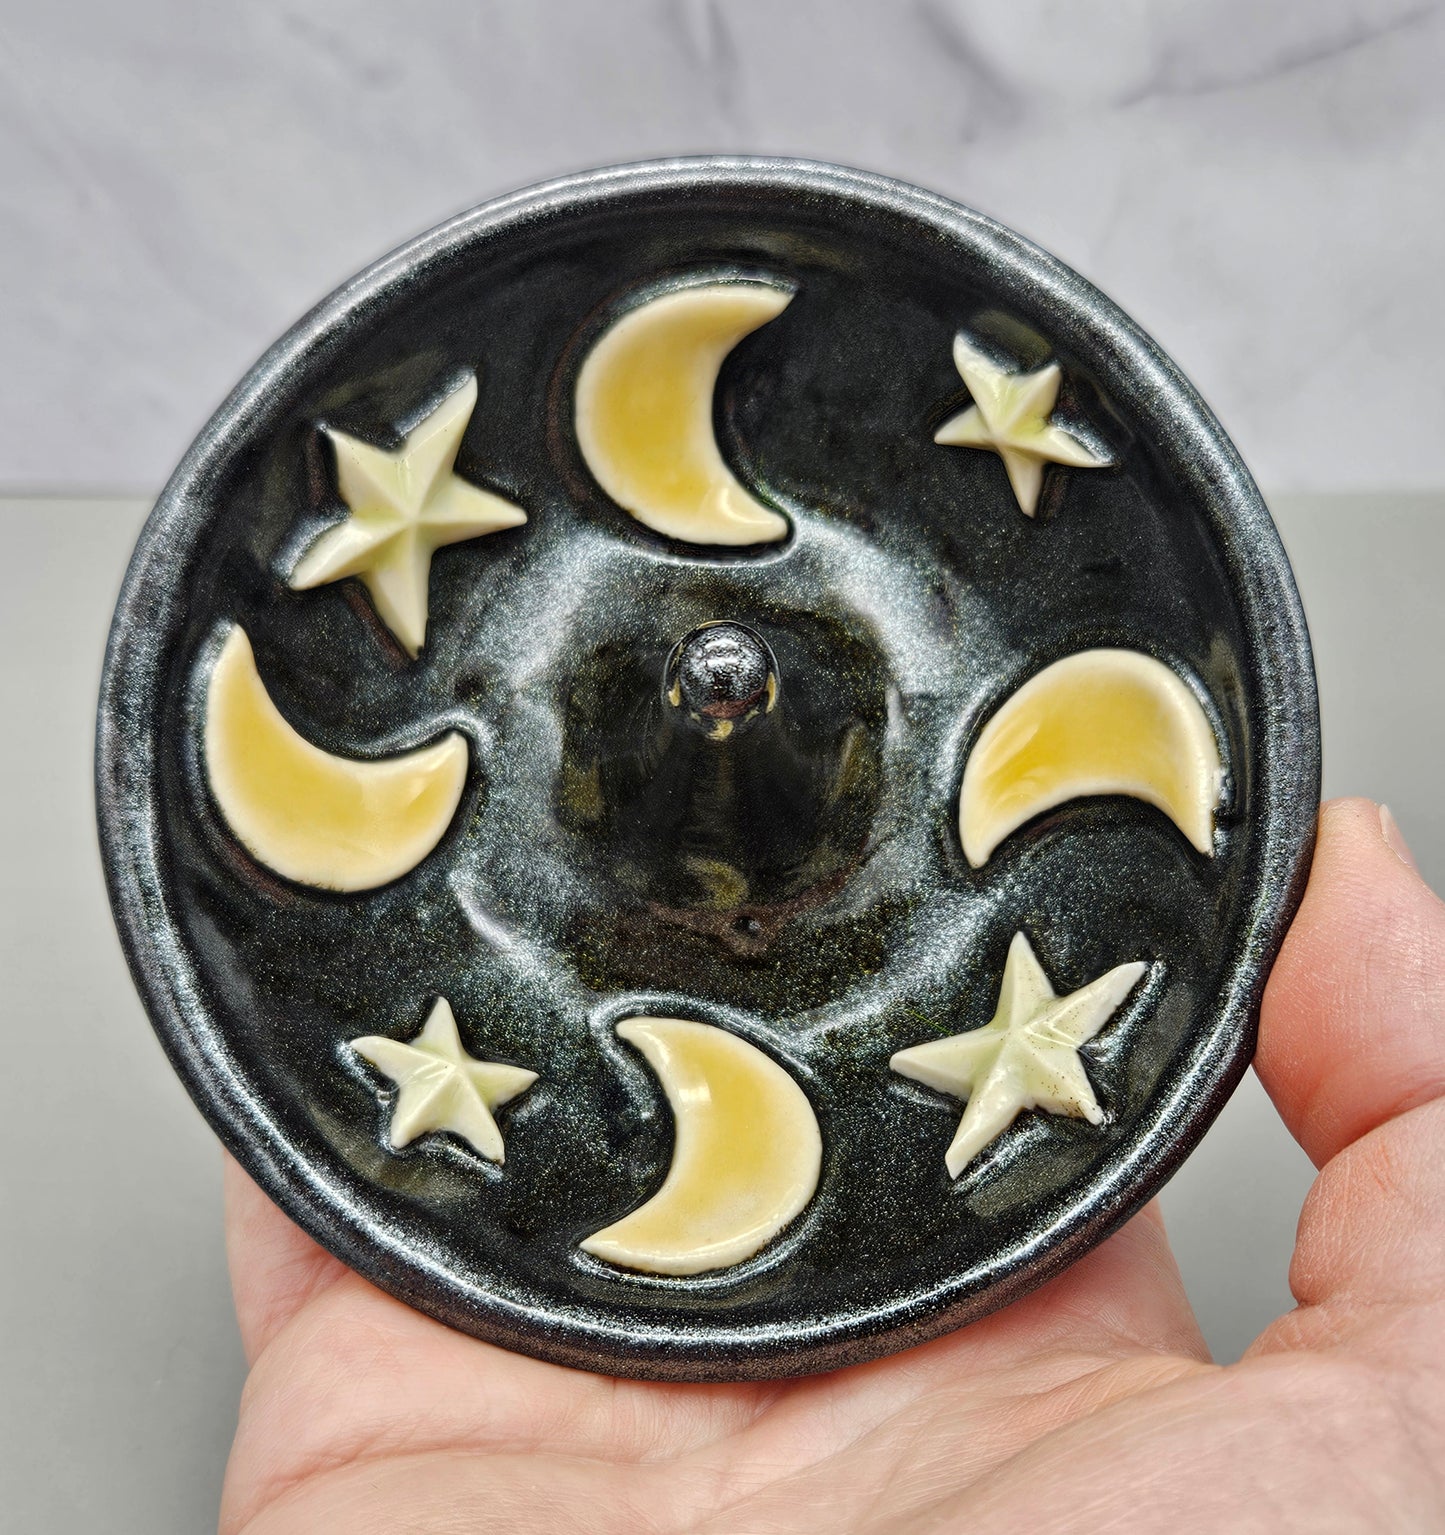 Moon light ring dishes